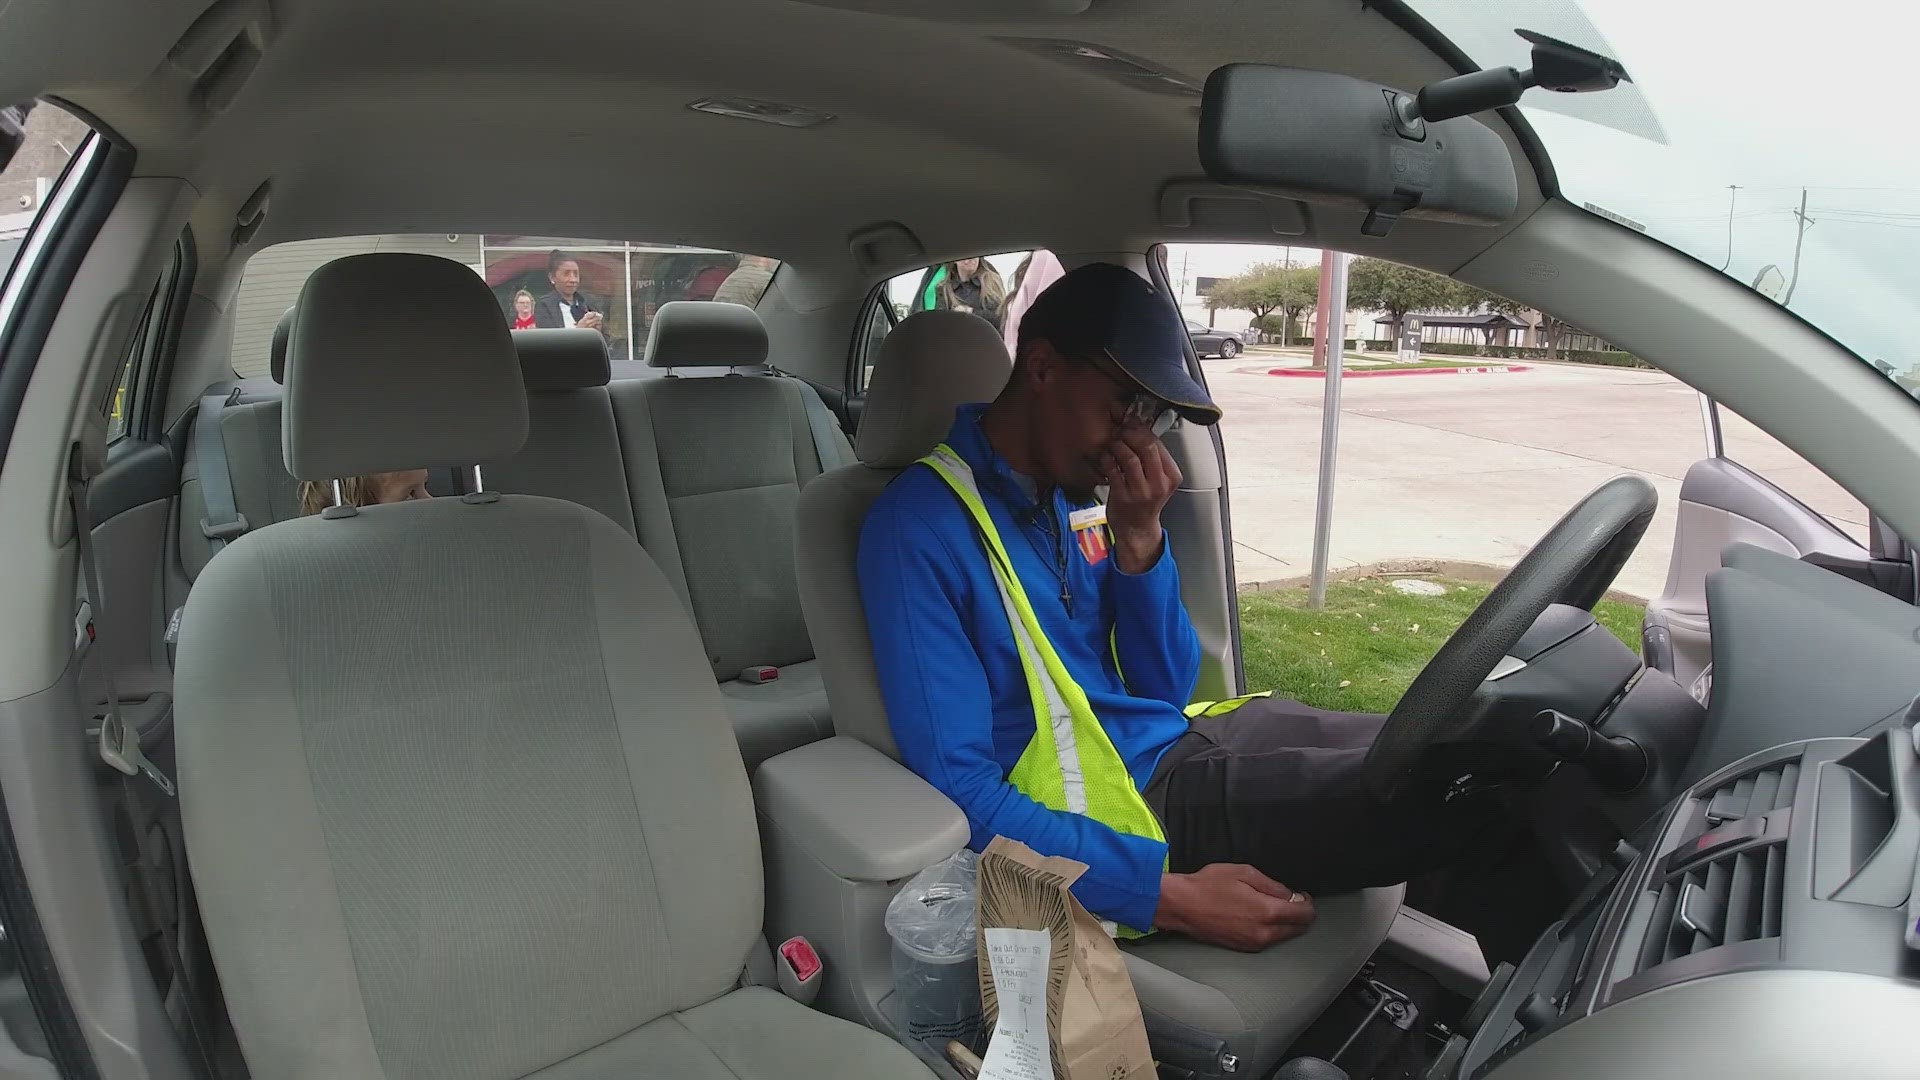 Derrick was homeless until Doug and Kyli saw him in 12-degree weather. He's been turning his life around as a McDonald's employee.